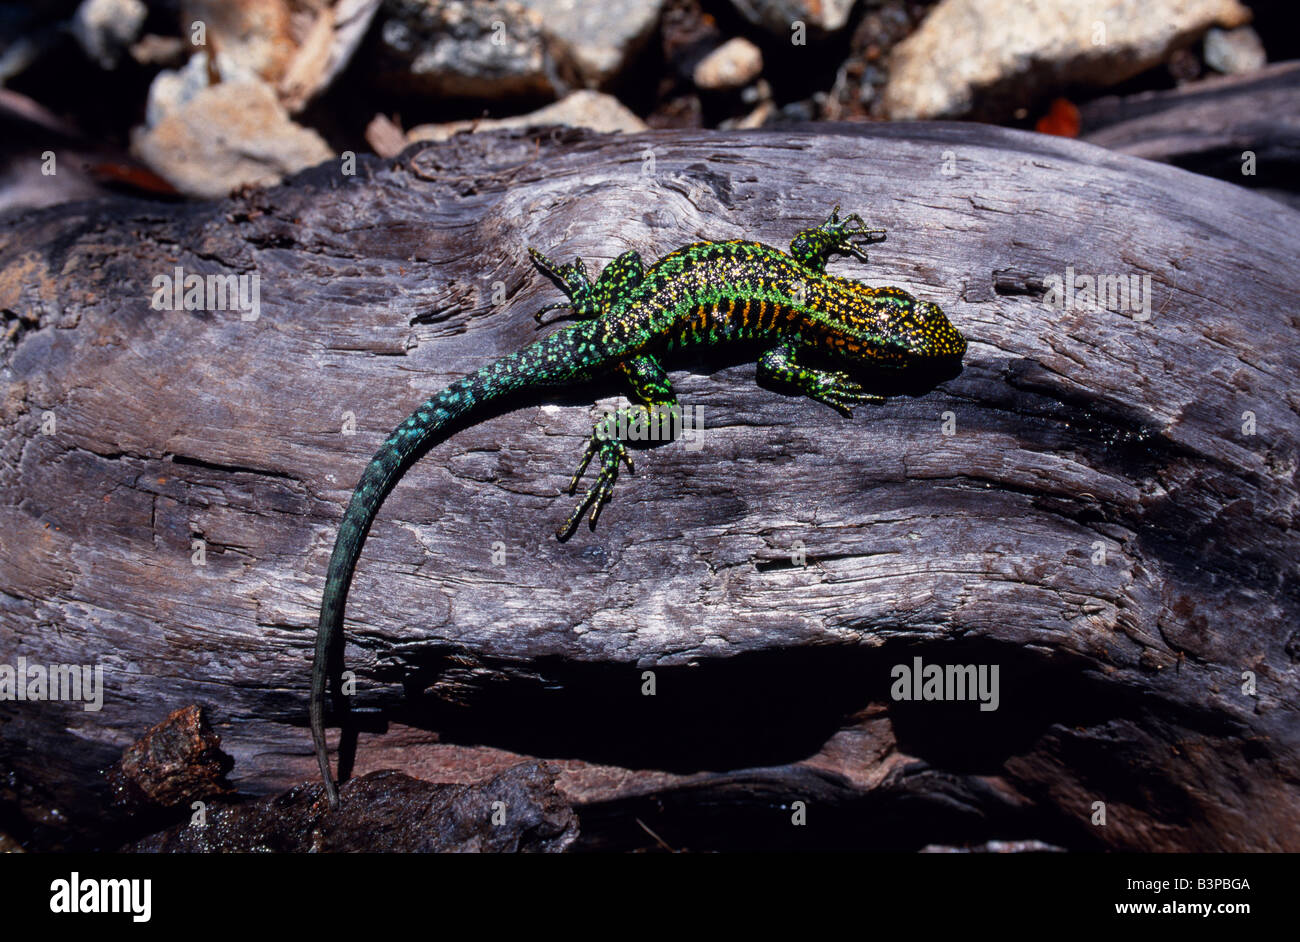 Chile, Lake District, Alerce Forest. Lizard on log Stock Photo